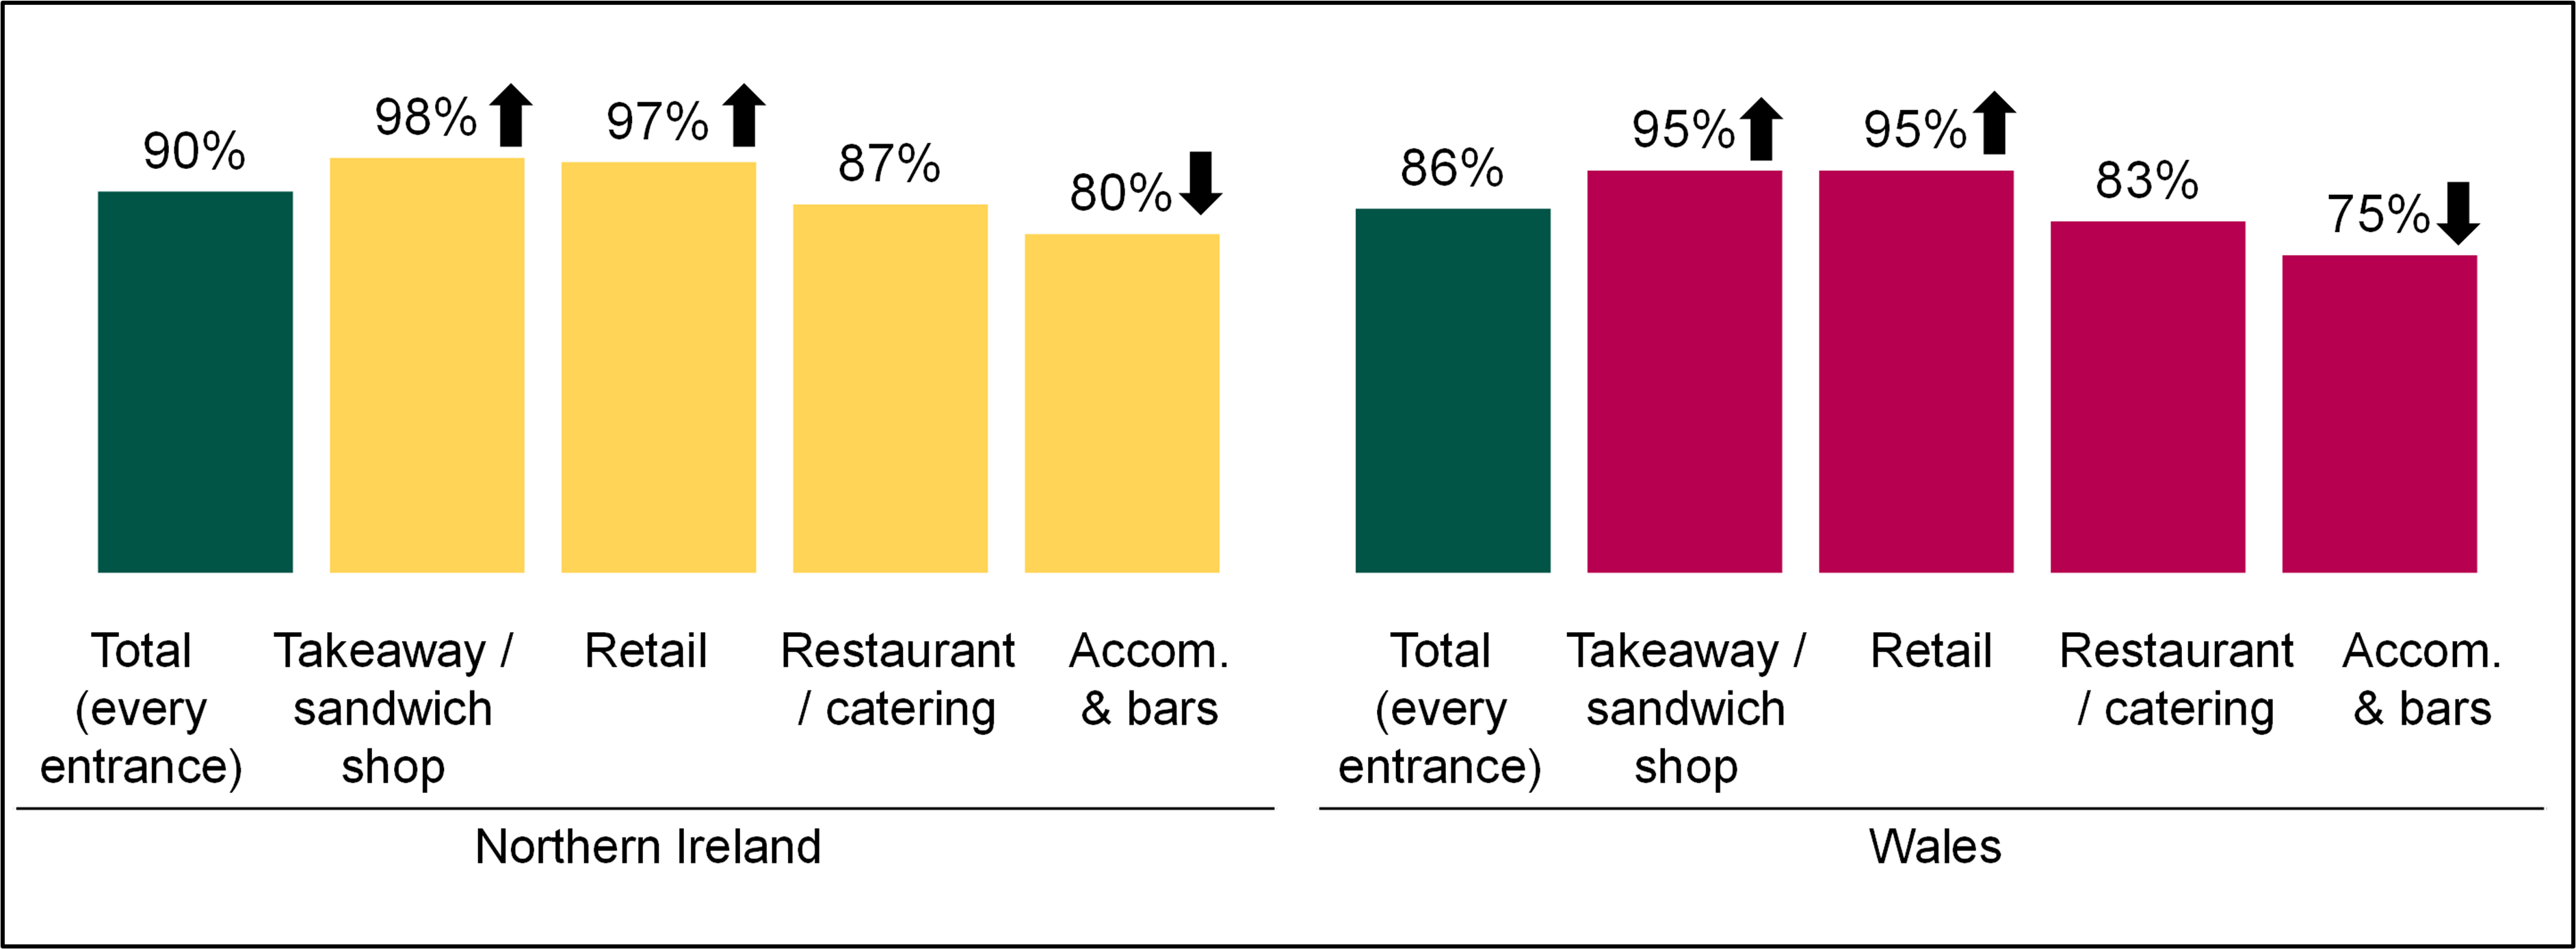 Northern Ireland: Total (every entrance) 90%, Takeaway/ Sandwich shop 98%, Retail 97%, Restaurant / Catering 87%,  Accom. & Bars 80%.  Wales: Total (every entrance) 86%, Takeaway/ Sandwich shop 95%, Retail 95%, Restaurants / Catering 83%, Accom. & Bars 75%.